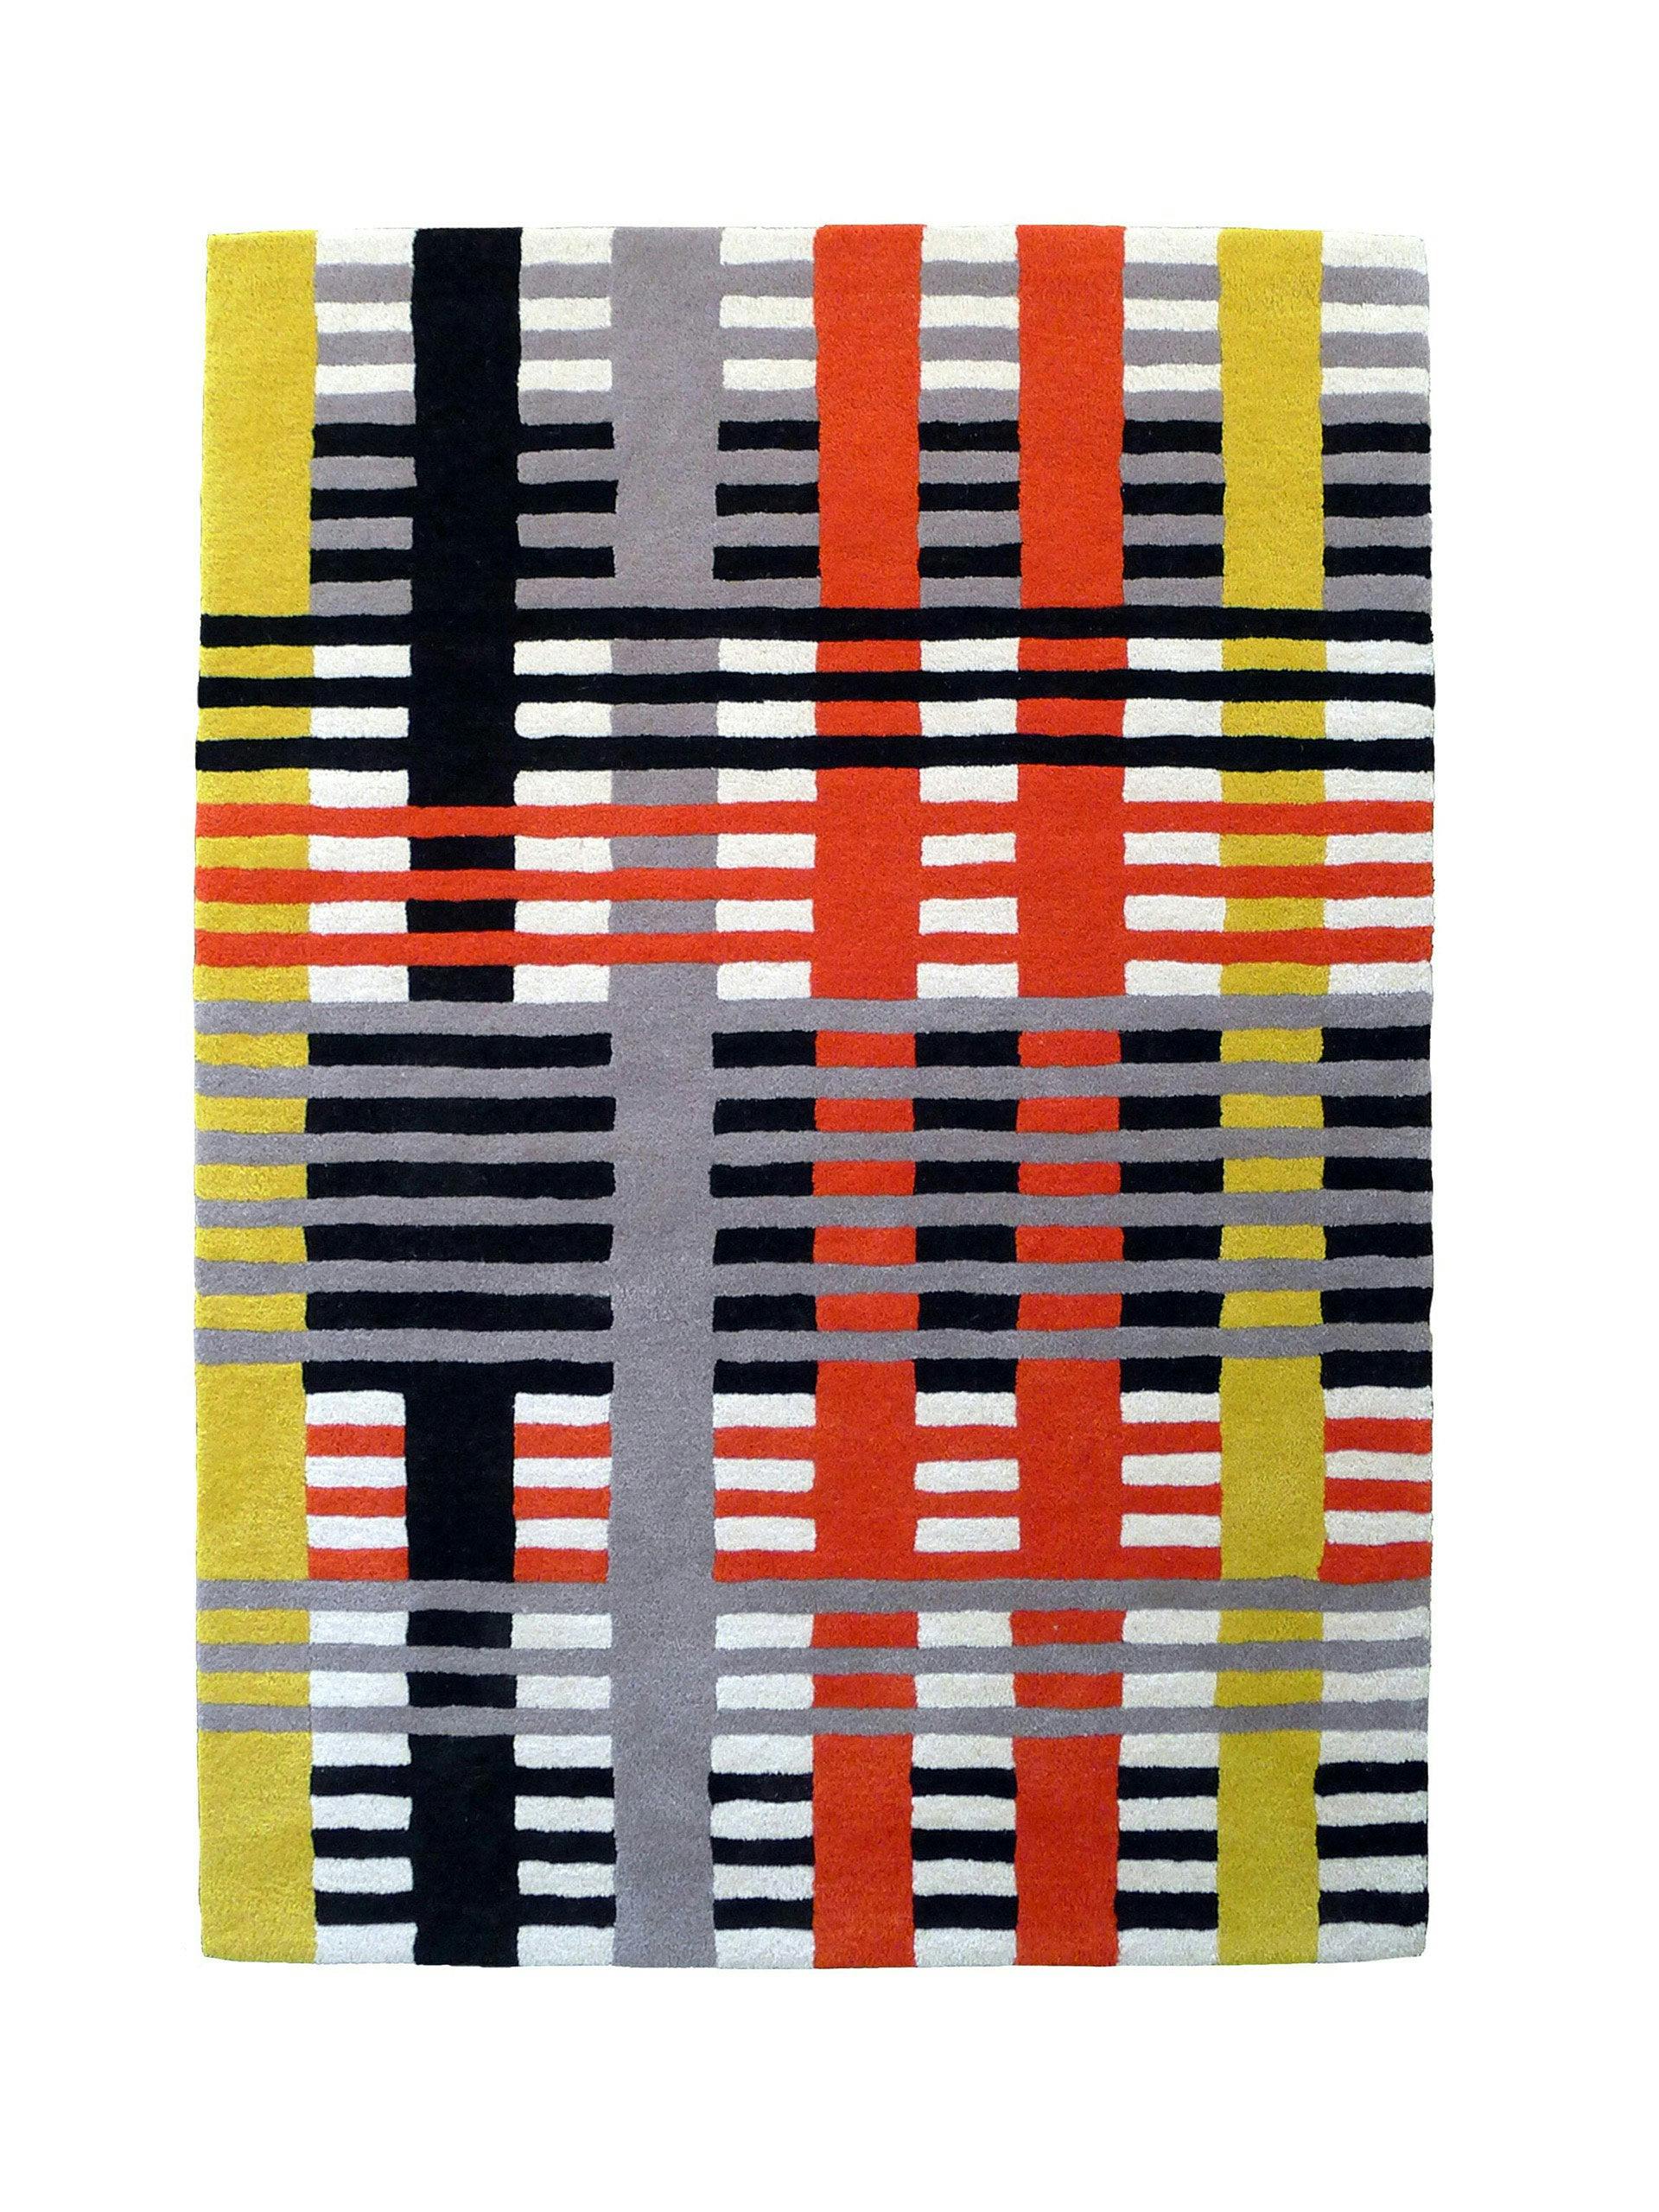 Study Large by Anni Albers - 1.8 x 1.2m